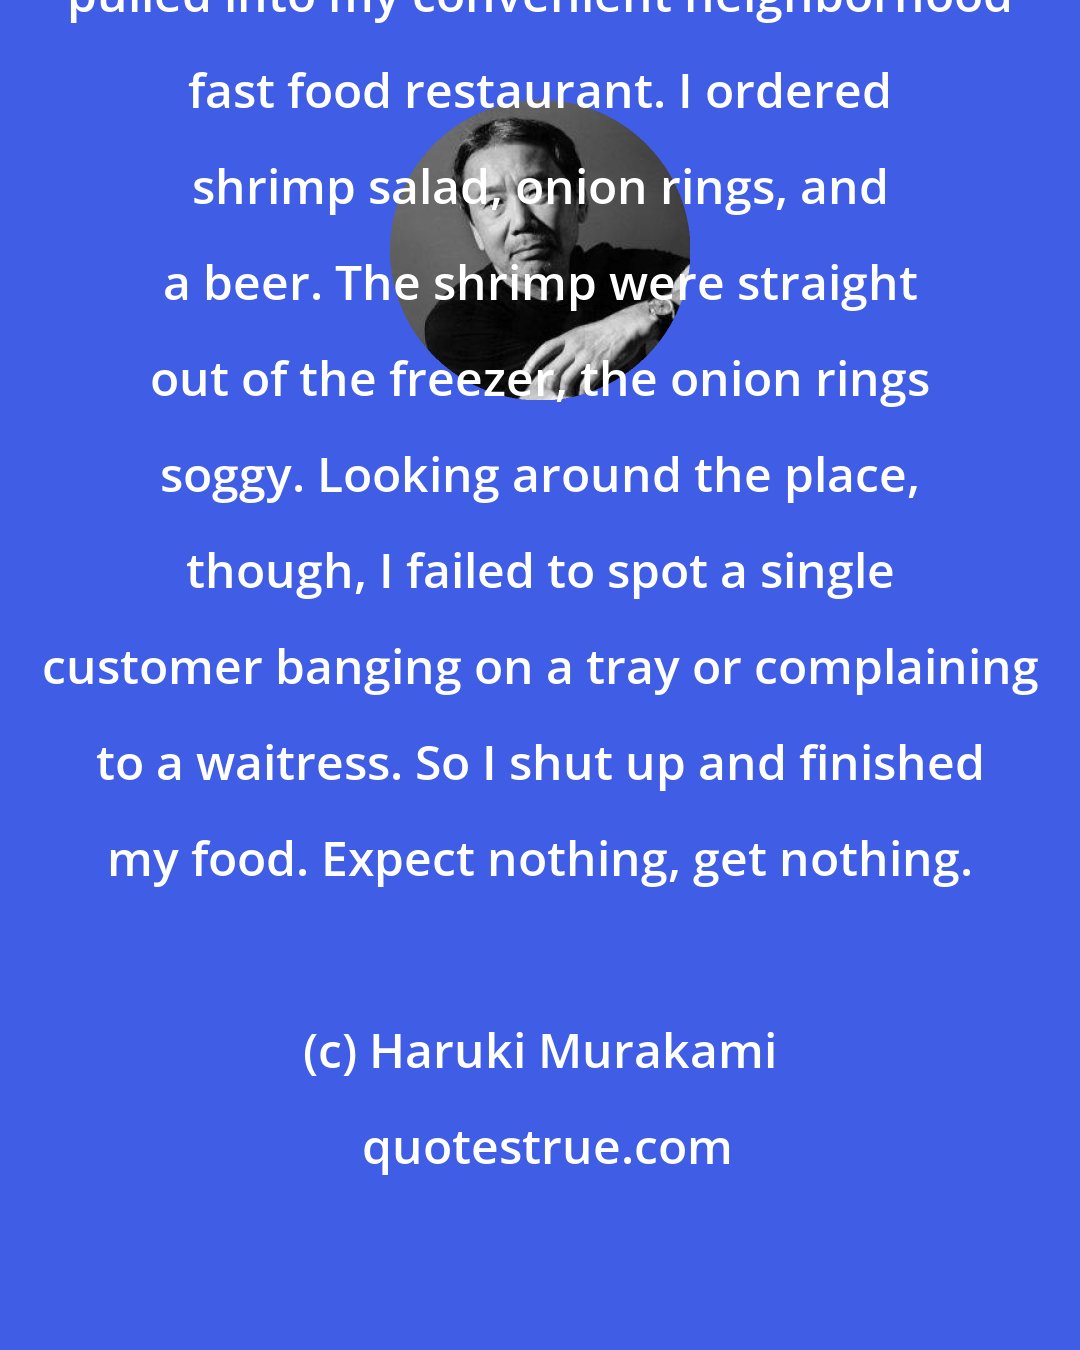 Haruki Murakami: pulled into my convenient neighborhood fast food restaurant. I ordered shrimp salad, onion rings, and a beer. The shrimp were straight out of the freezer, the onion rings soggy. Looking around the place, though, I failed to spot a single customer banging on a tray or complaining to a waitress. So I shut up and finished my food. Expect nothing, get nothing.